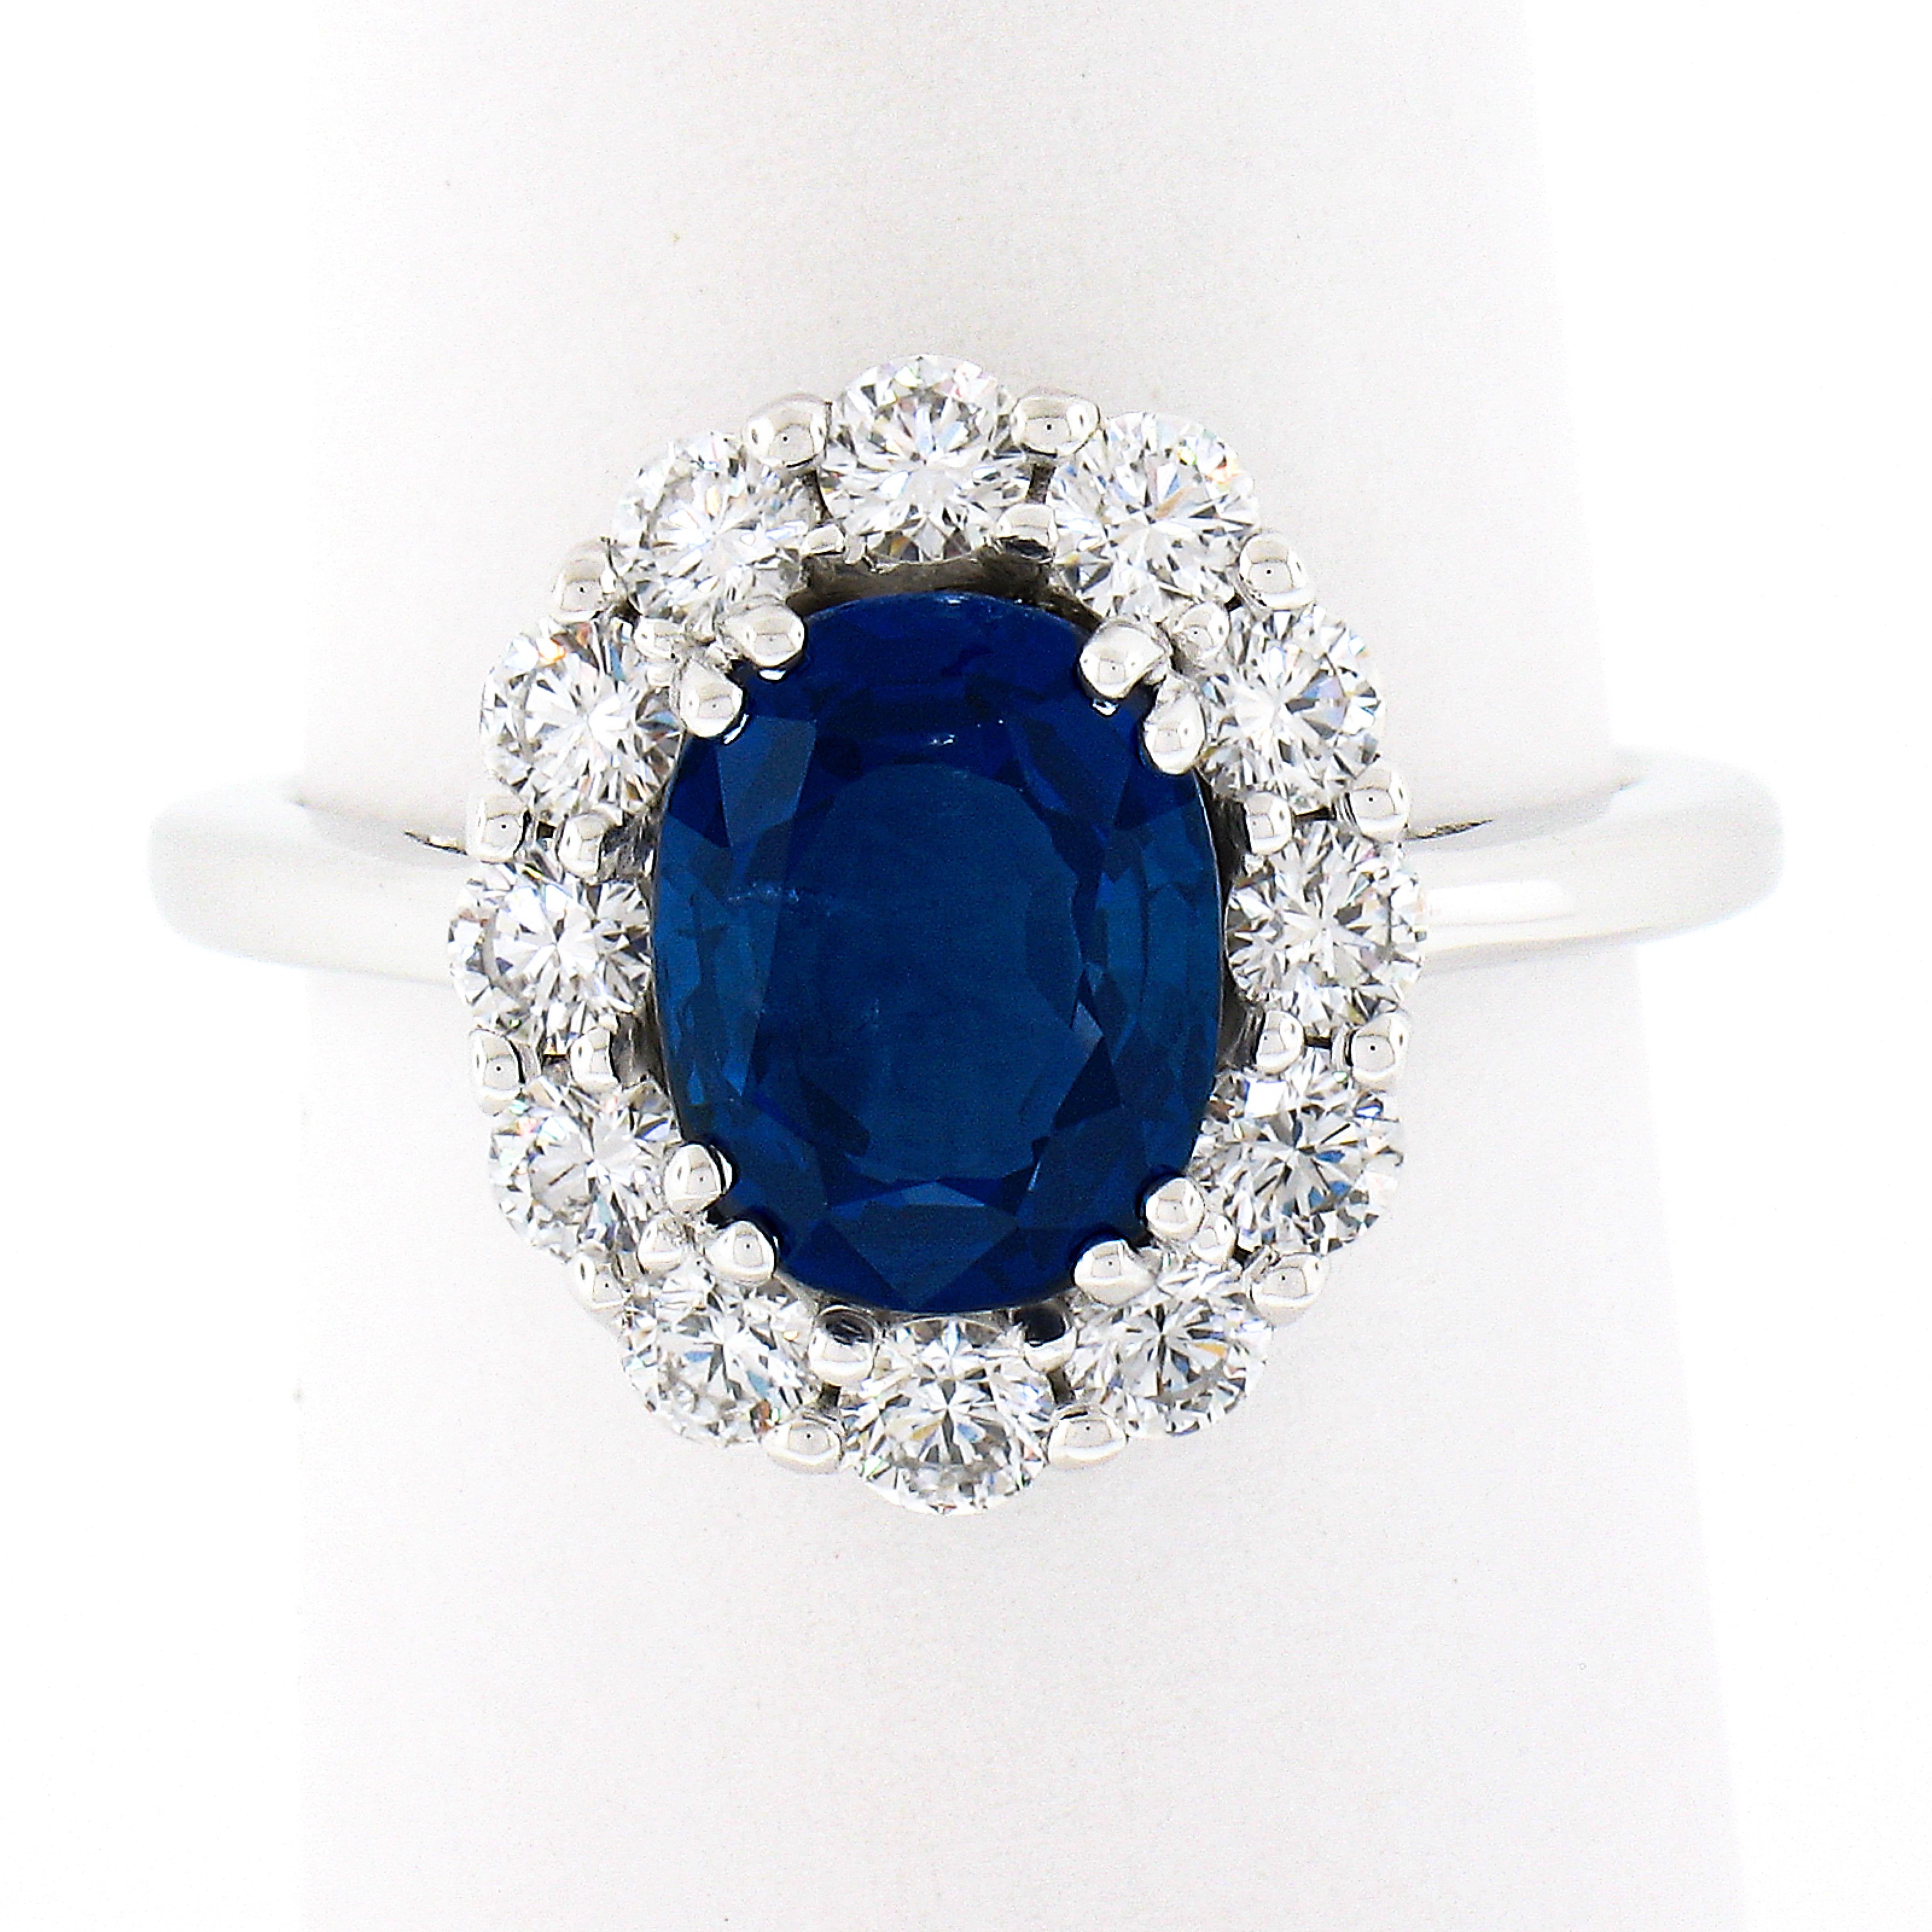 This absolutely magnificent and very well made sapphire and diamond ring is newly crafted in solid 18k white gold and features an incredible, 2.56 carat, old sapphire stone neatly dual prong set at the center of a super fiery diamond halo. This